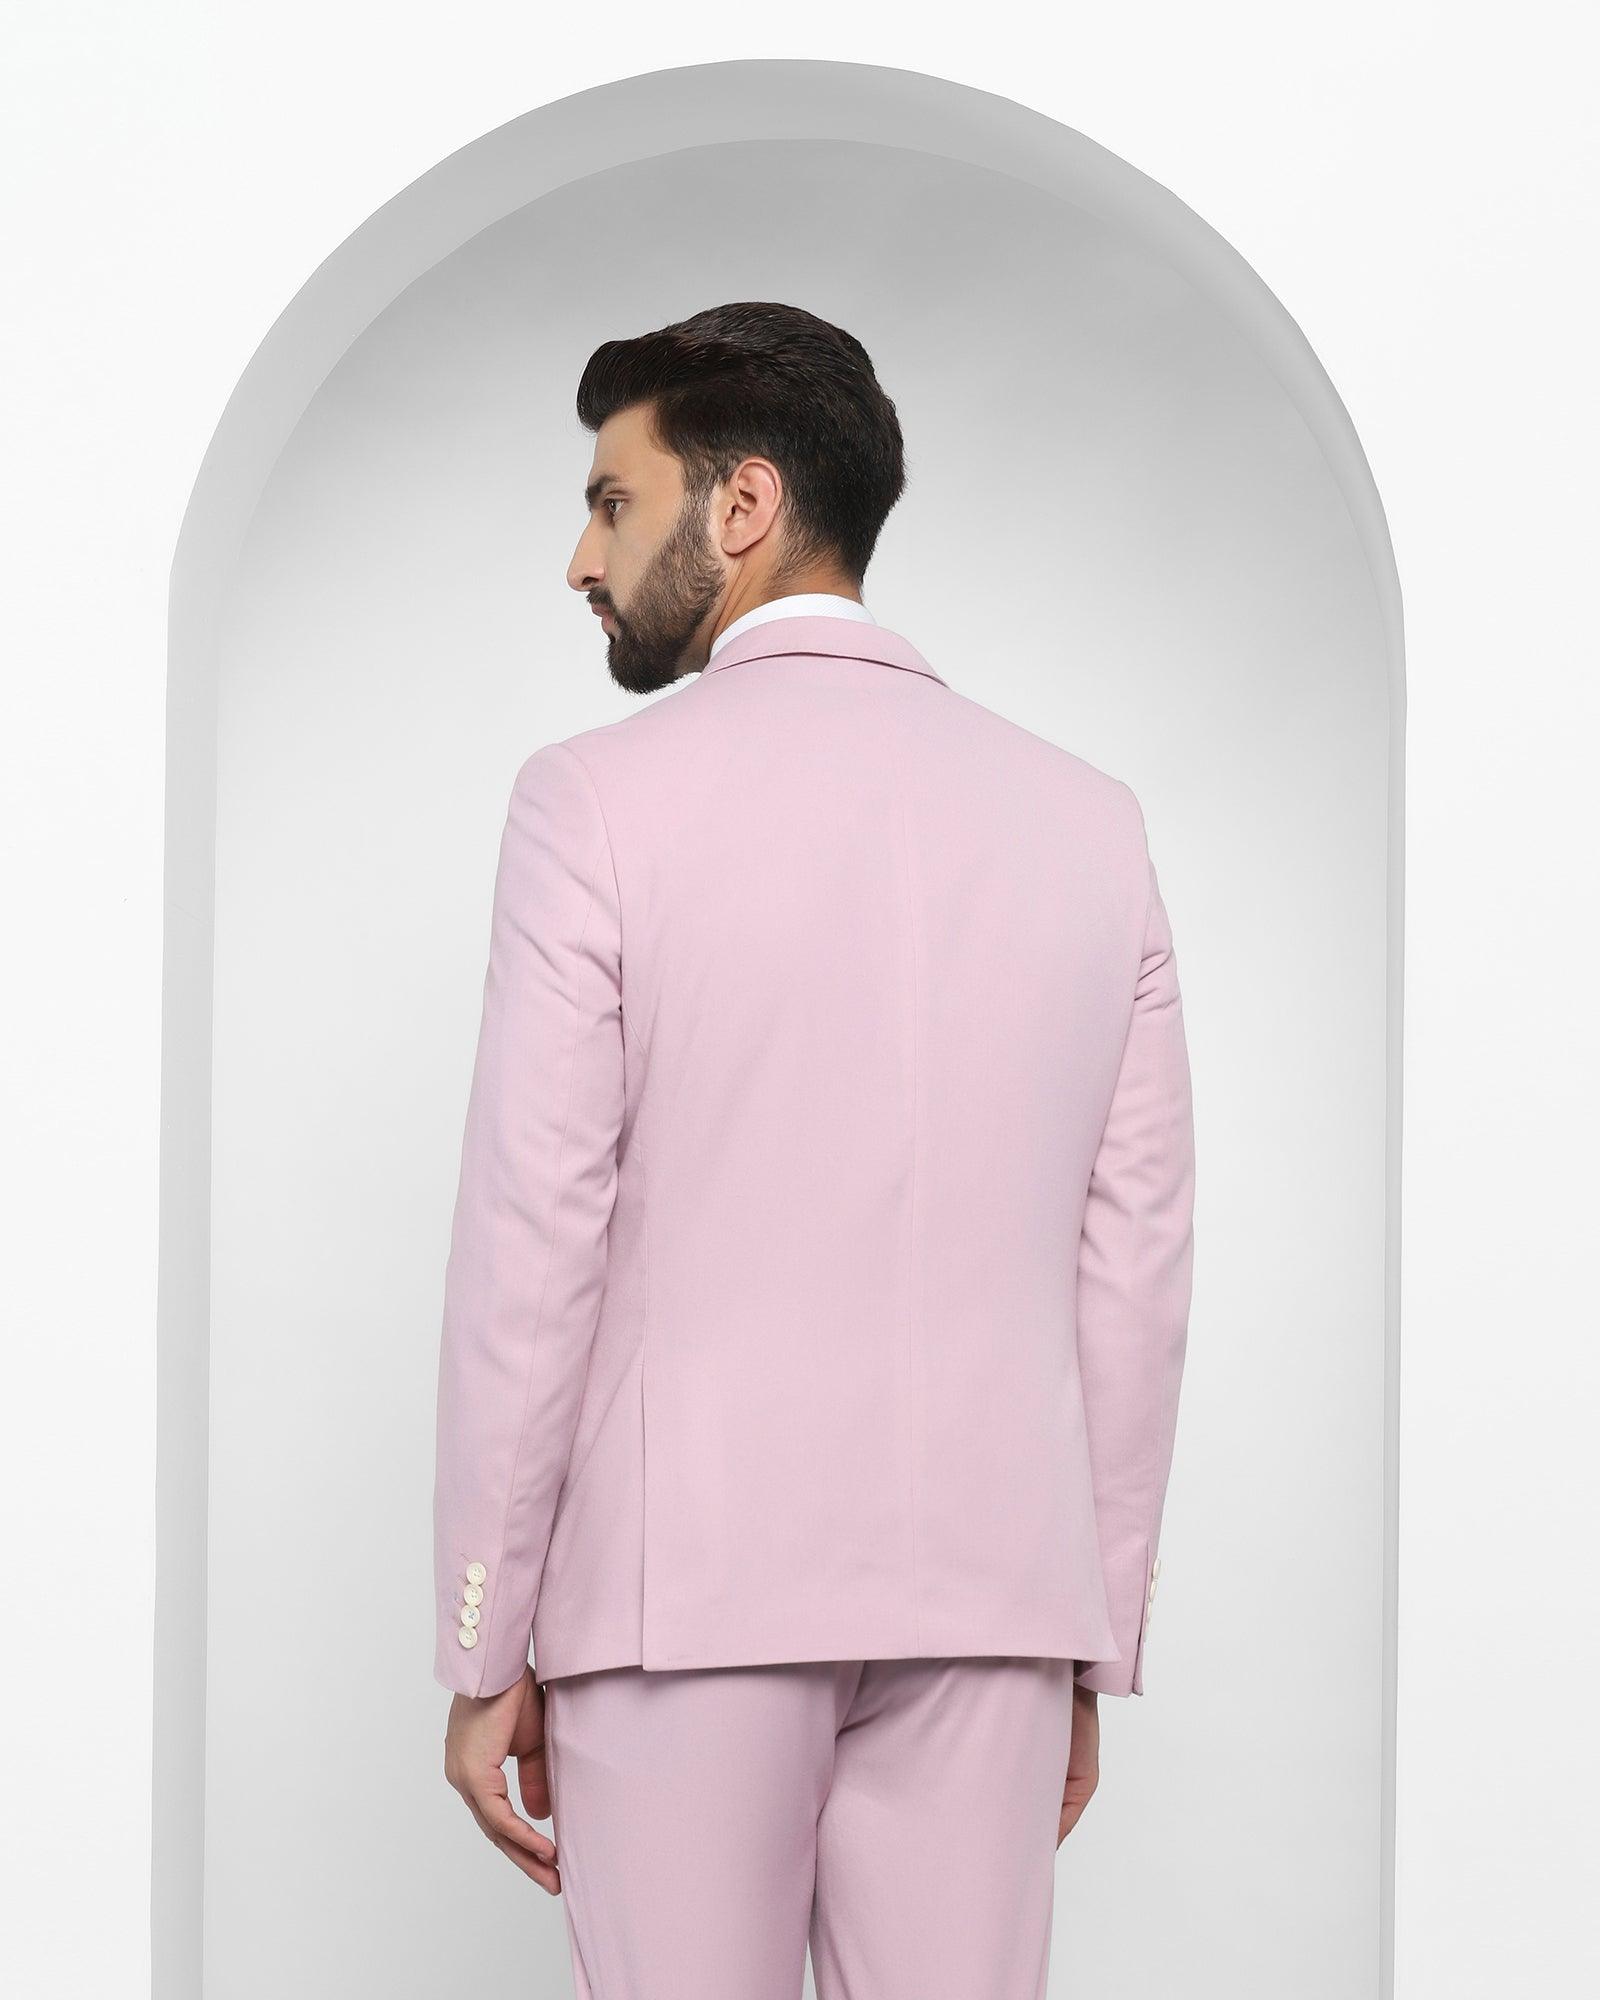 Three Piece Pink Solid Formal Suit - Oleto